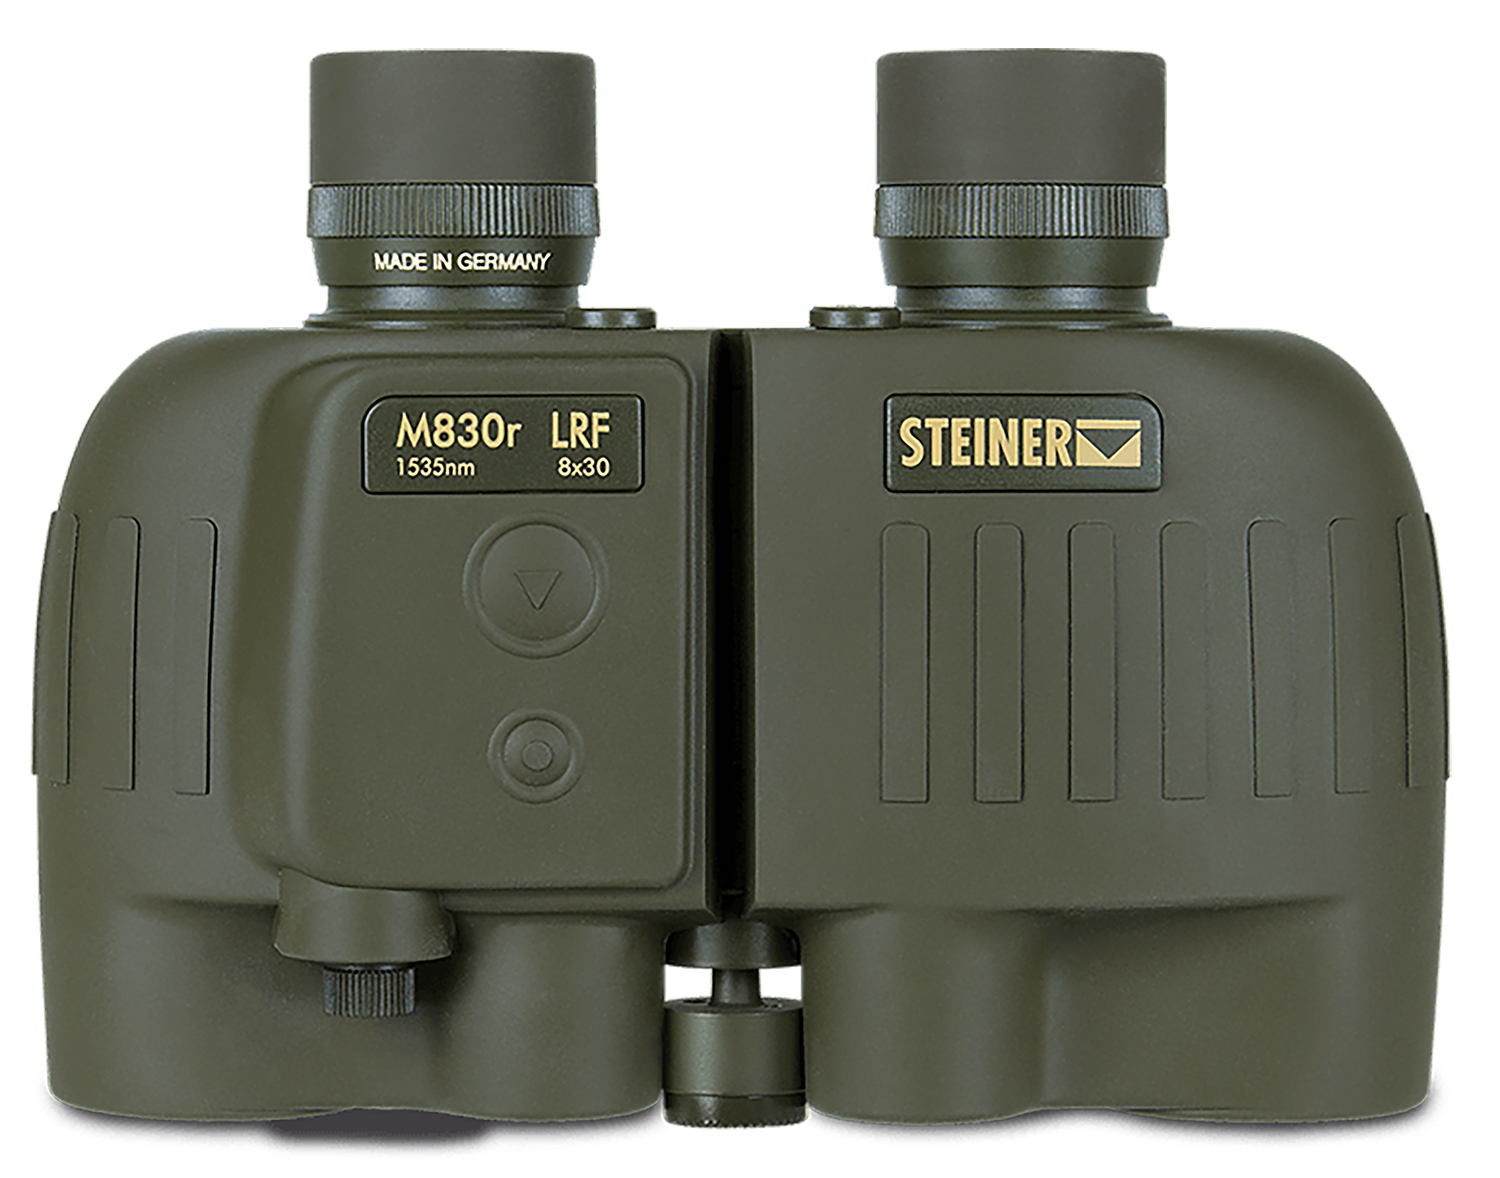 Steiner 2681 M830r LRF 1535nm 8x30mm Floating Prism Green Rubber Armor Makrolon Features Tripod Mount